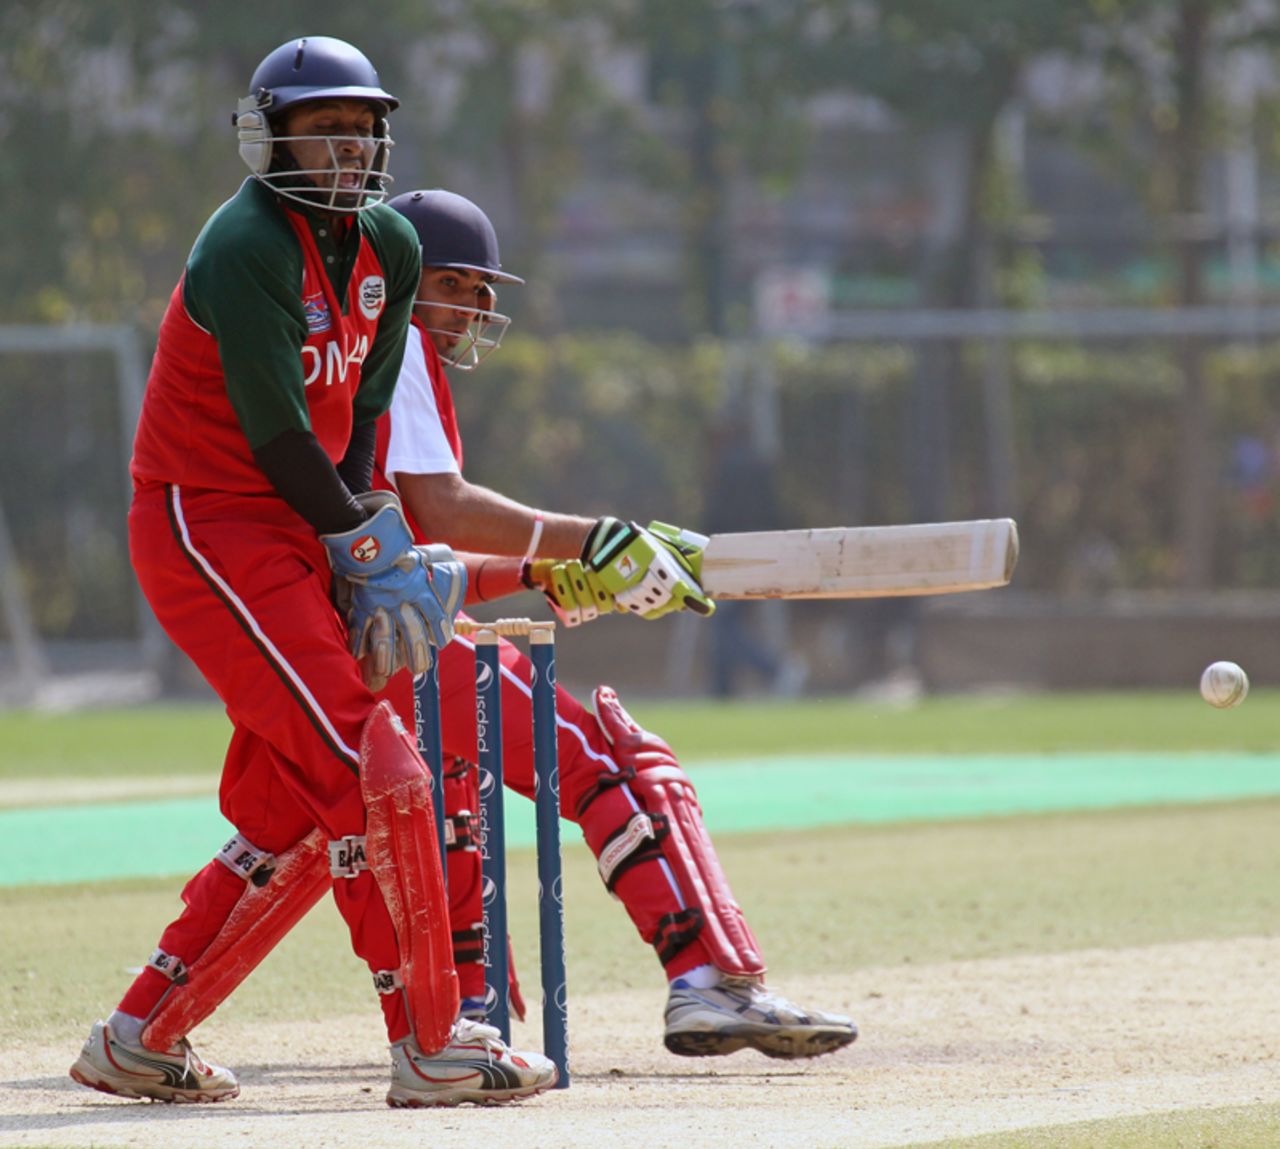 Hong Kong's Waqas Barkat reverse sweeps against Oman at Kowloon Cricket Club during the ICC WCL Division 3 match played on 23rd January 2011